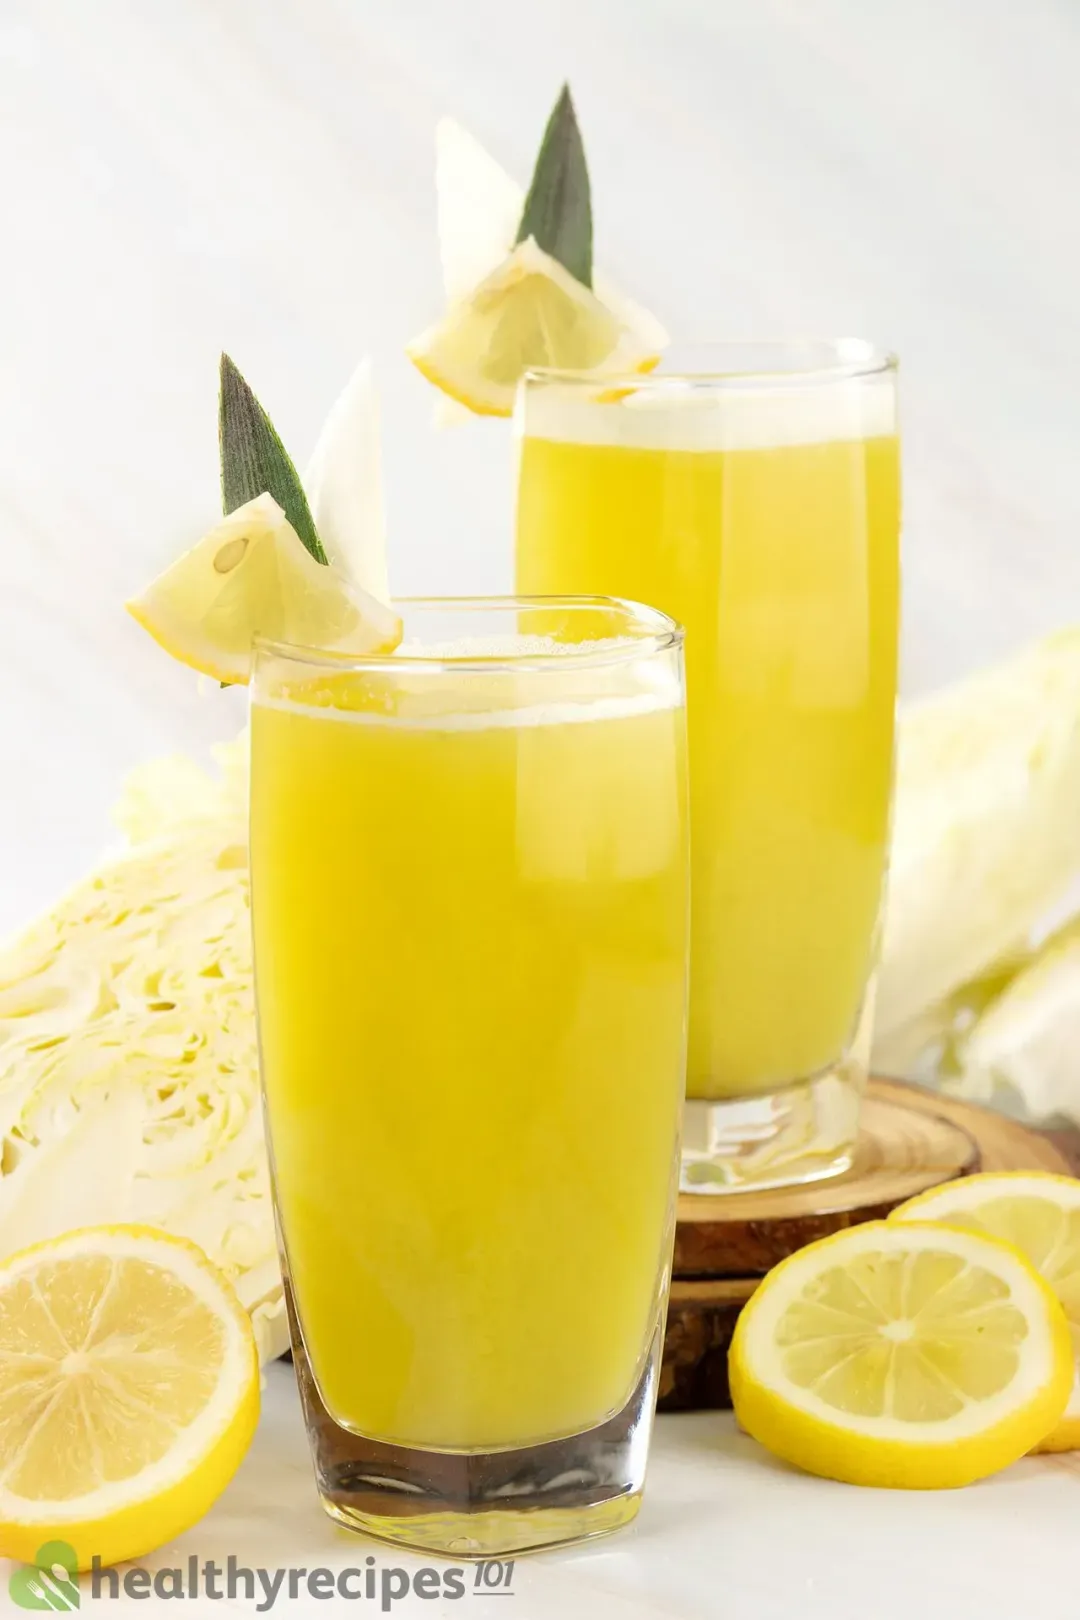 Two glasses of yellow-green cabbage drink, next to some cabbages and lemon wheels